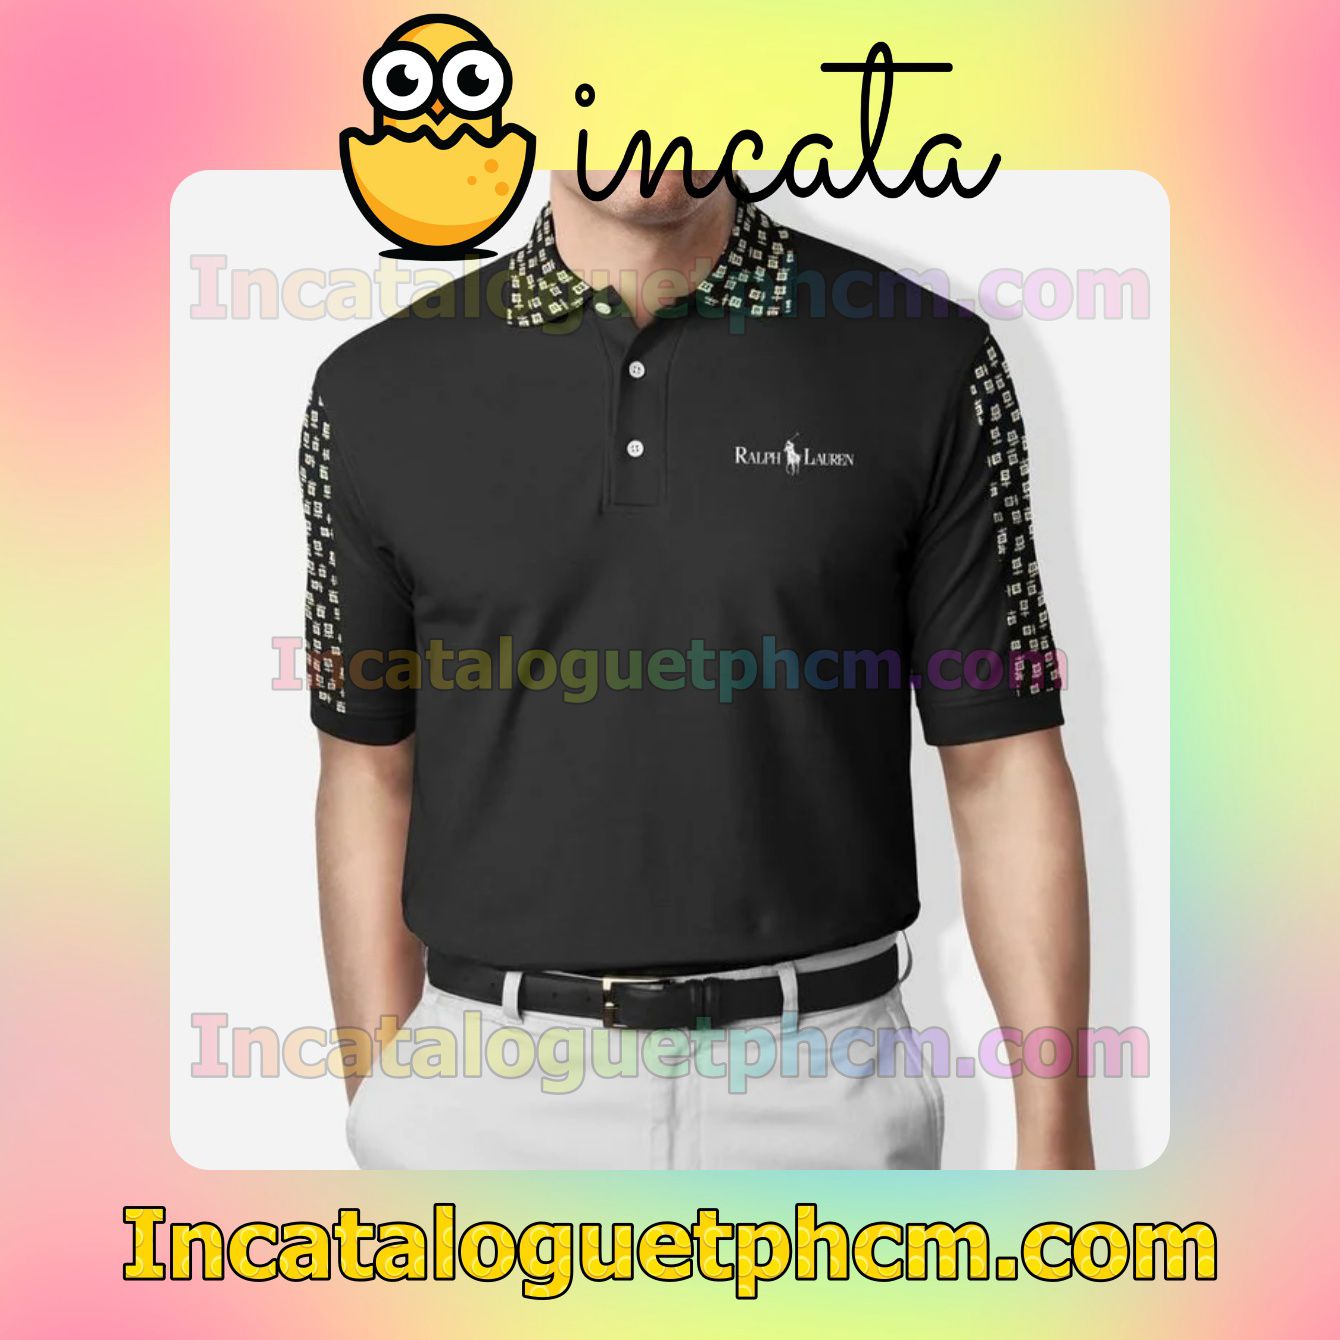 Ralph Lauren Luxury Brand Golf Outfit Black Polo Gift For Men Dad